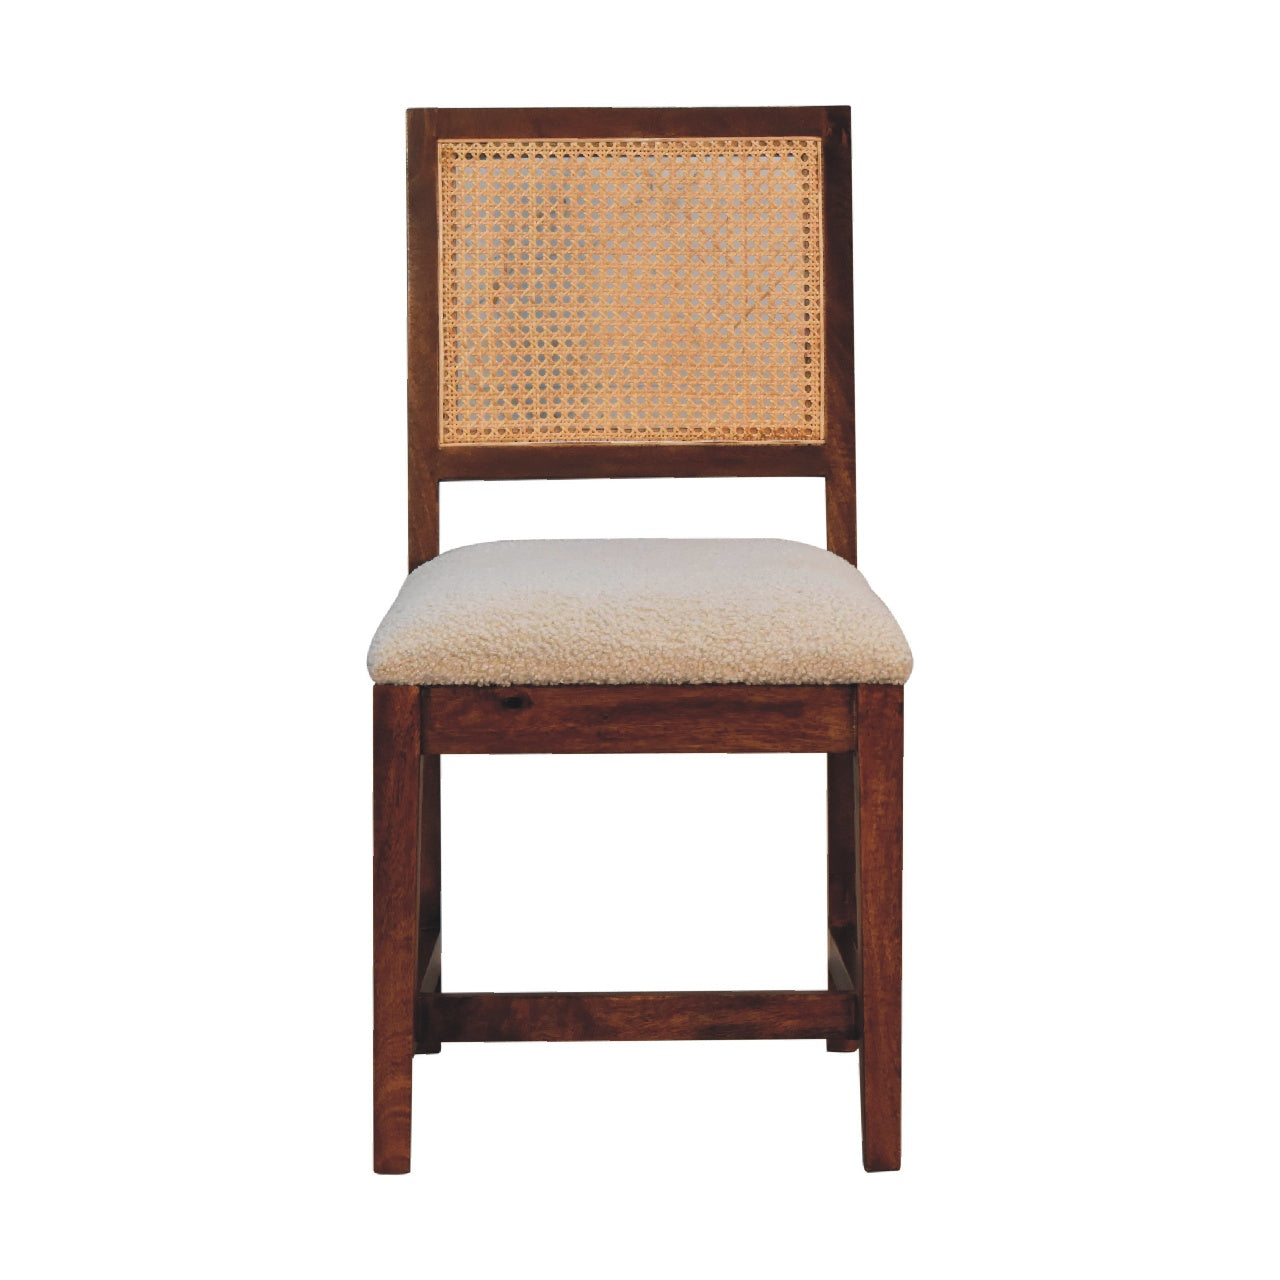 View Cream Boucle Rattan Chair information